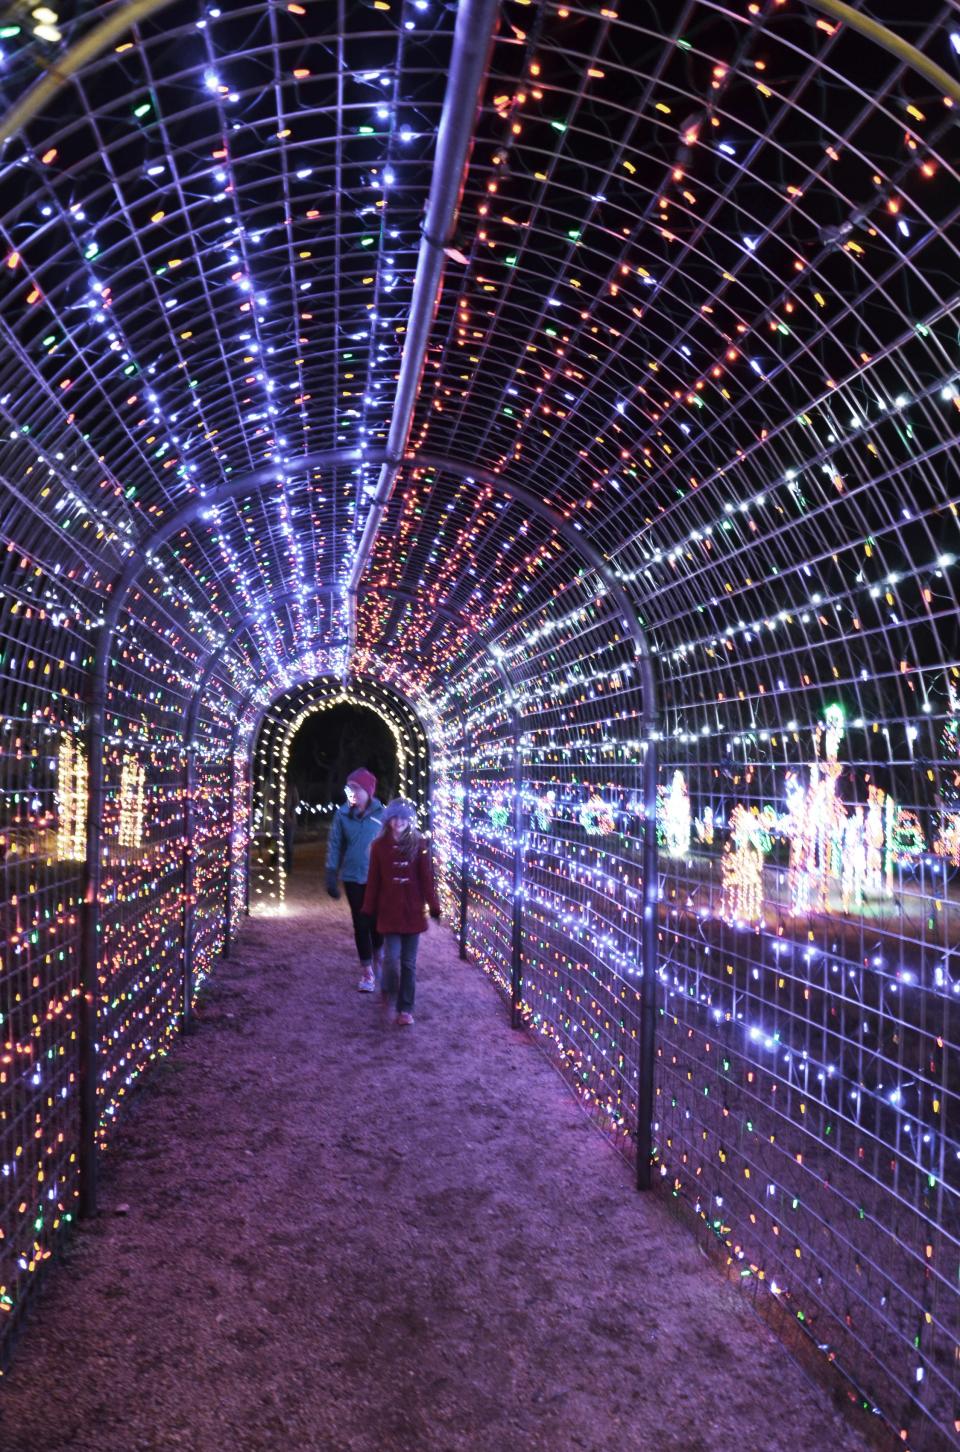 Looking for lights outside the hustle and bustle of Austin? Try Lakeway Trail of Lights.